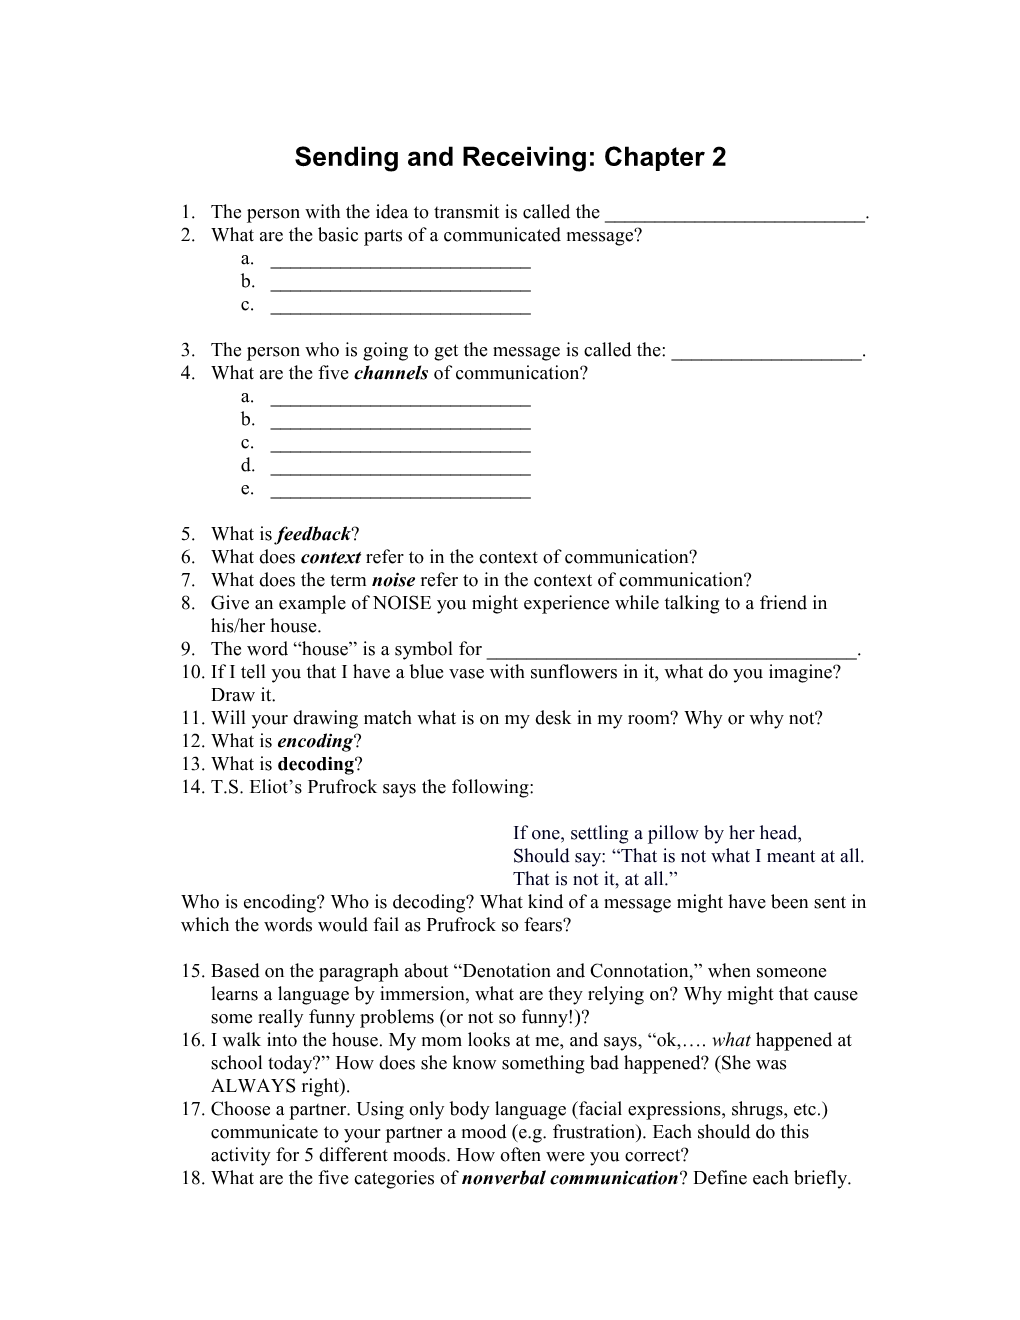 Sending and Receiving: Chapter 2